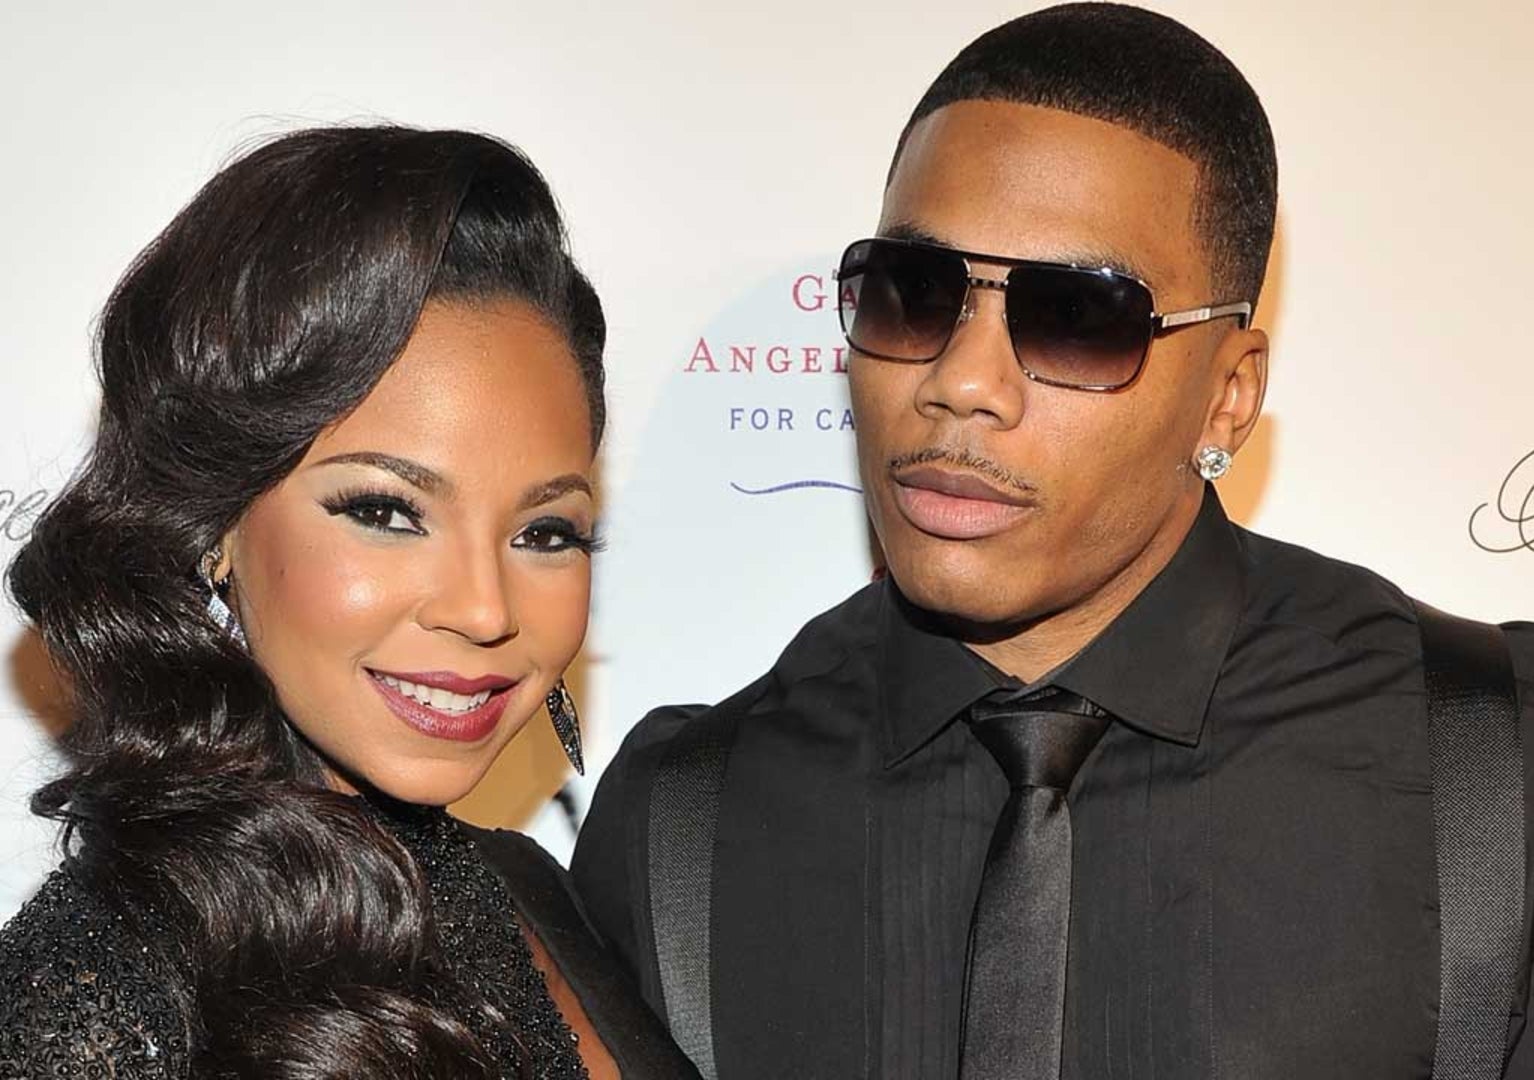 Ashanti and Nelly